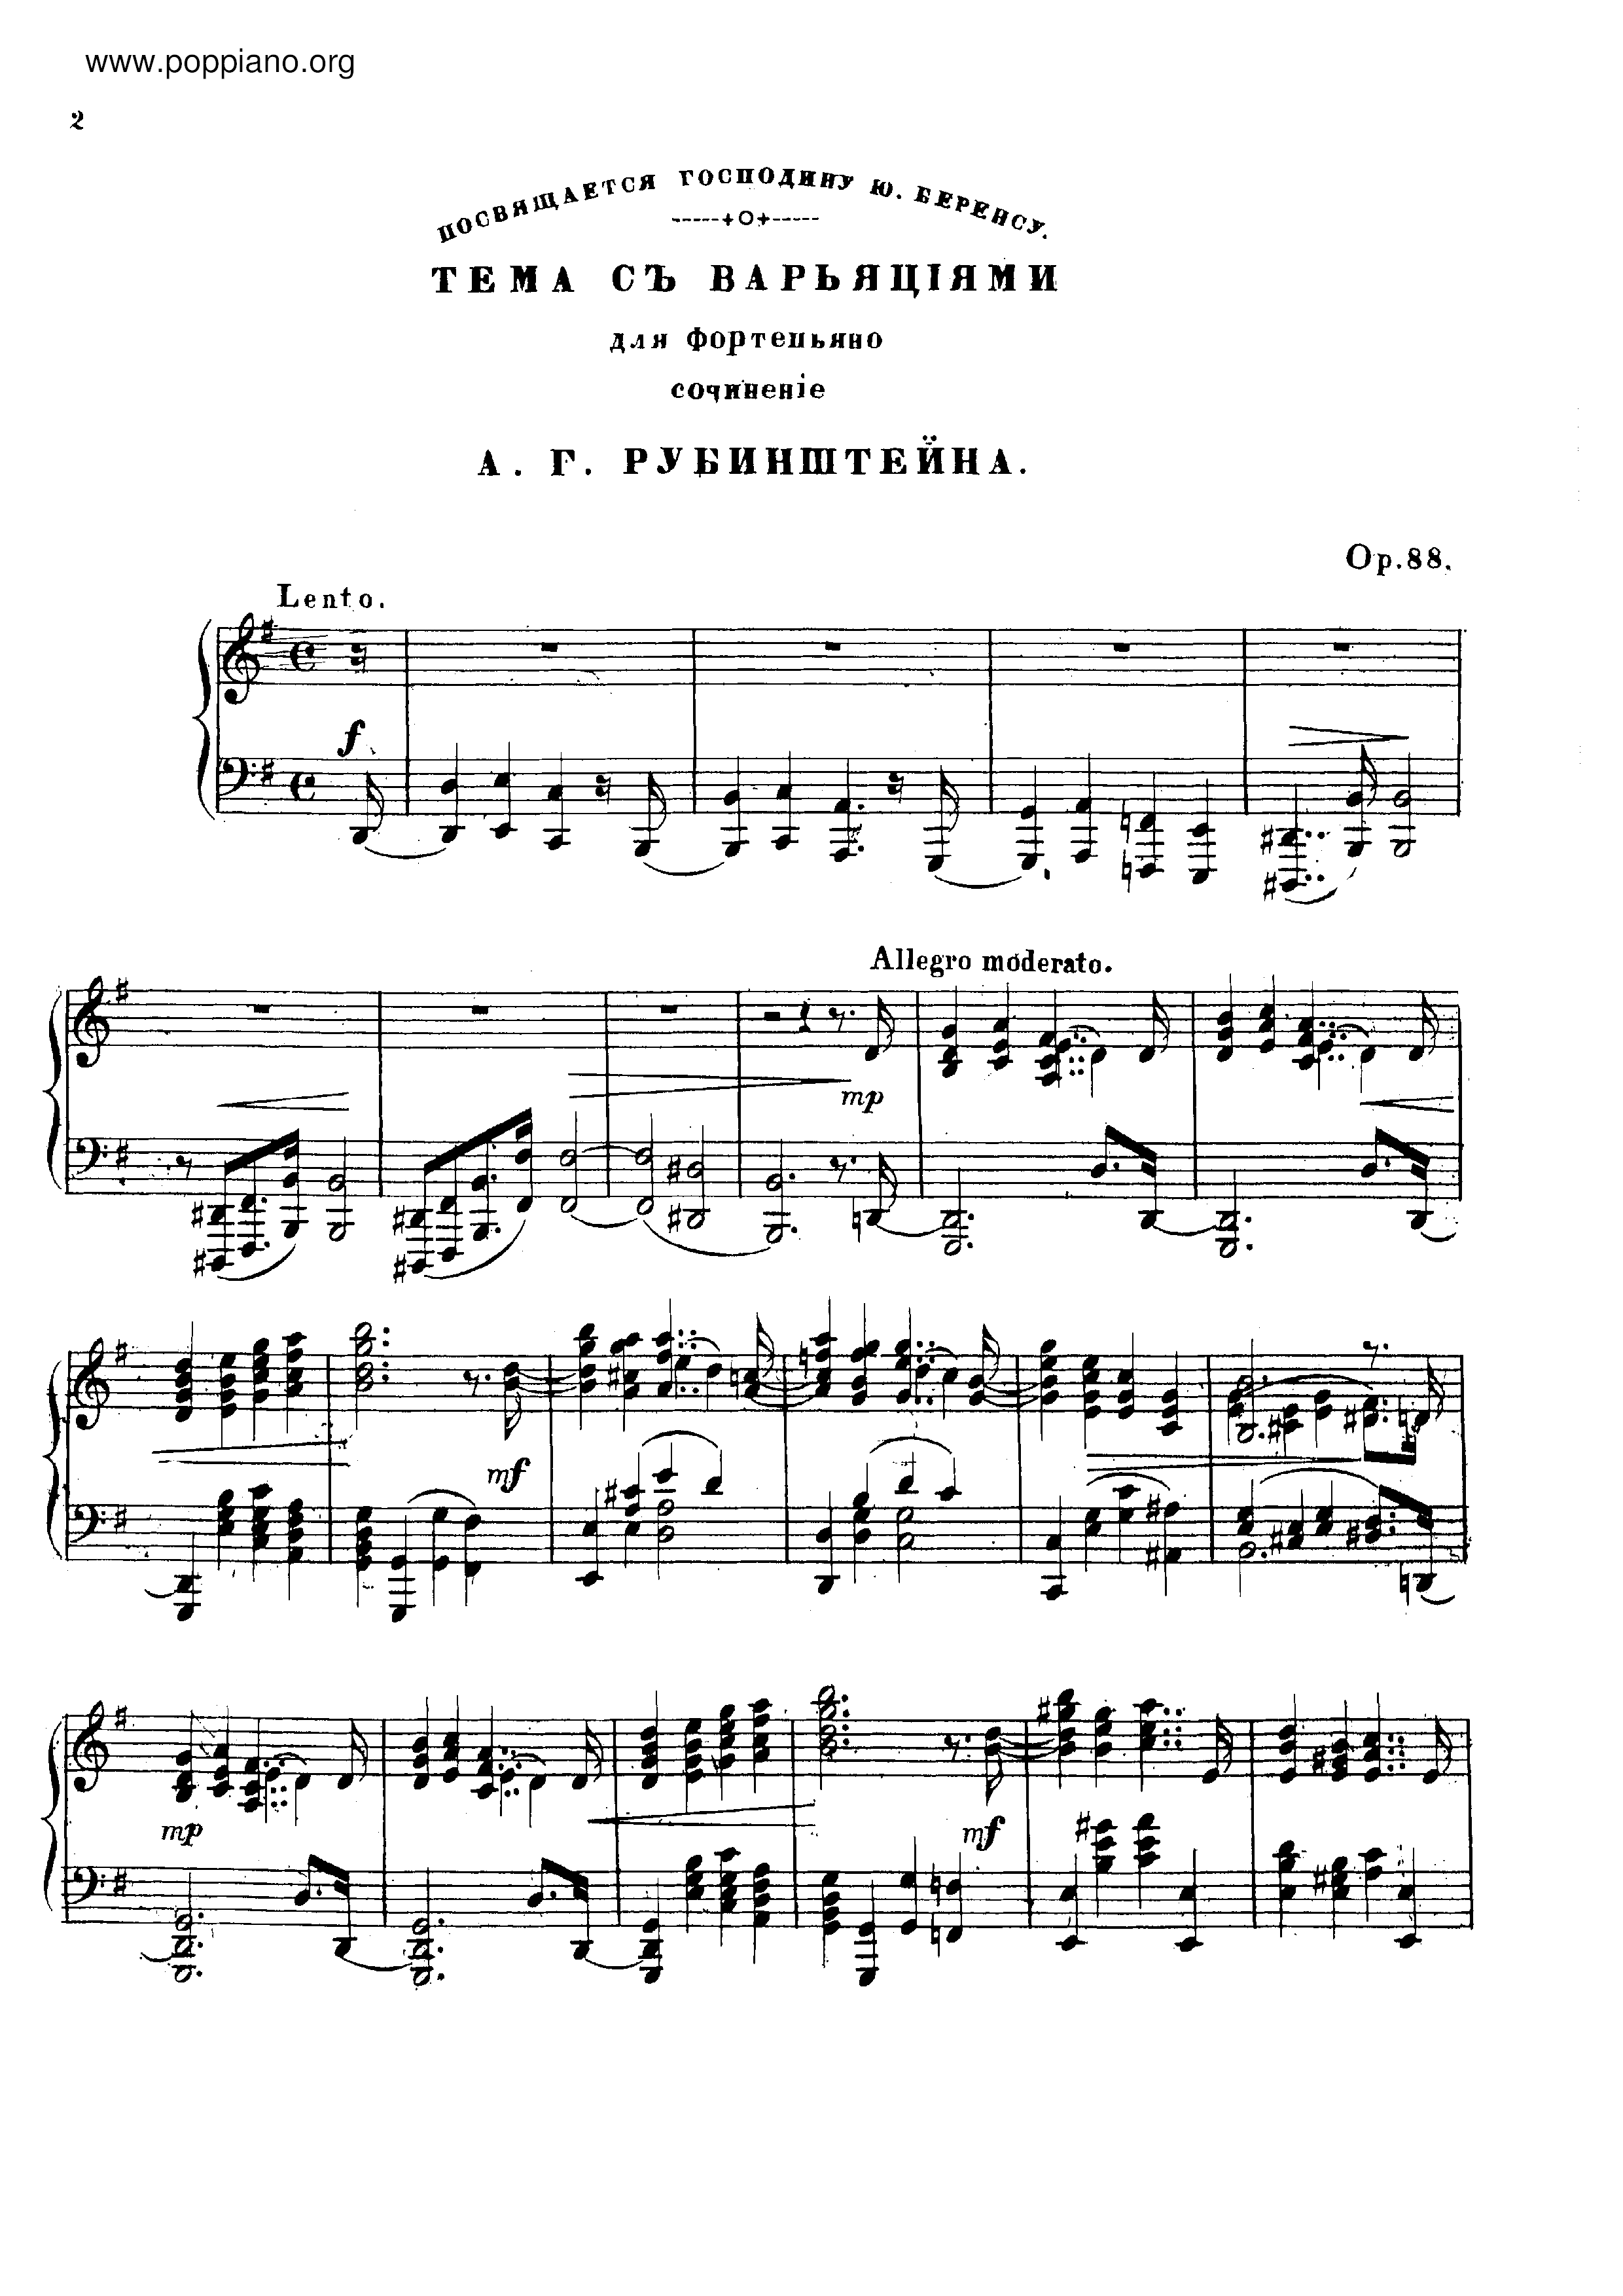 Theme and Variations, Op.88琴谱